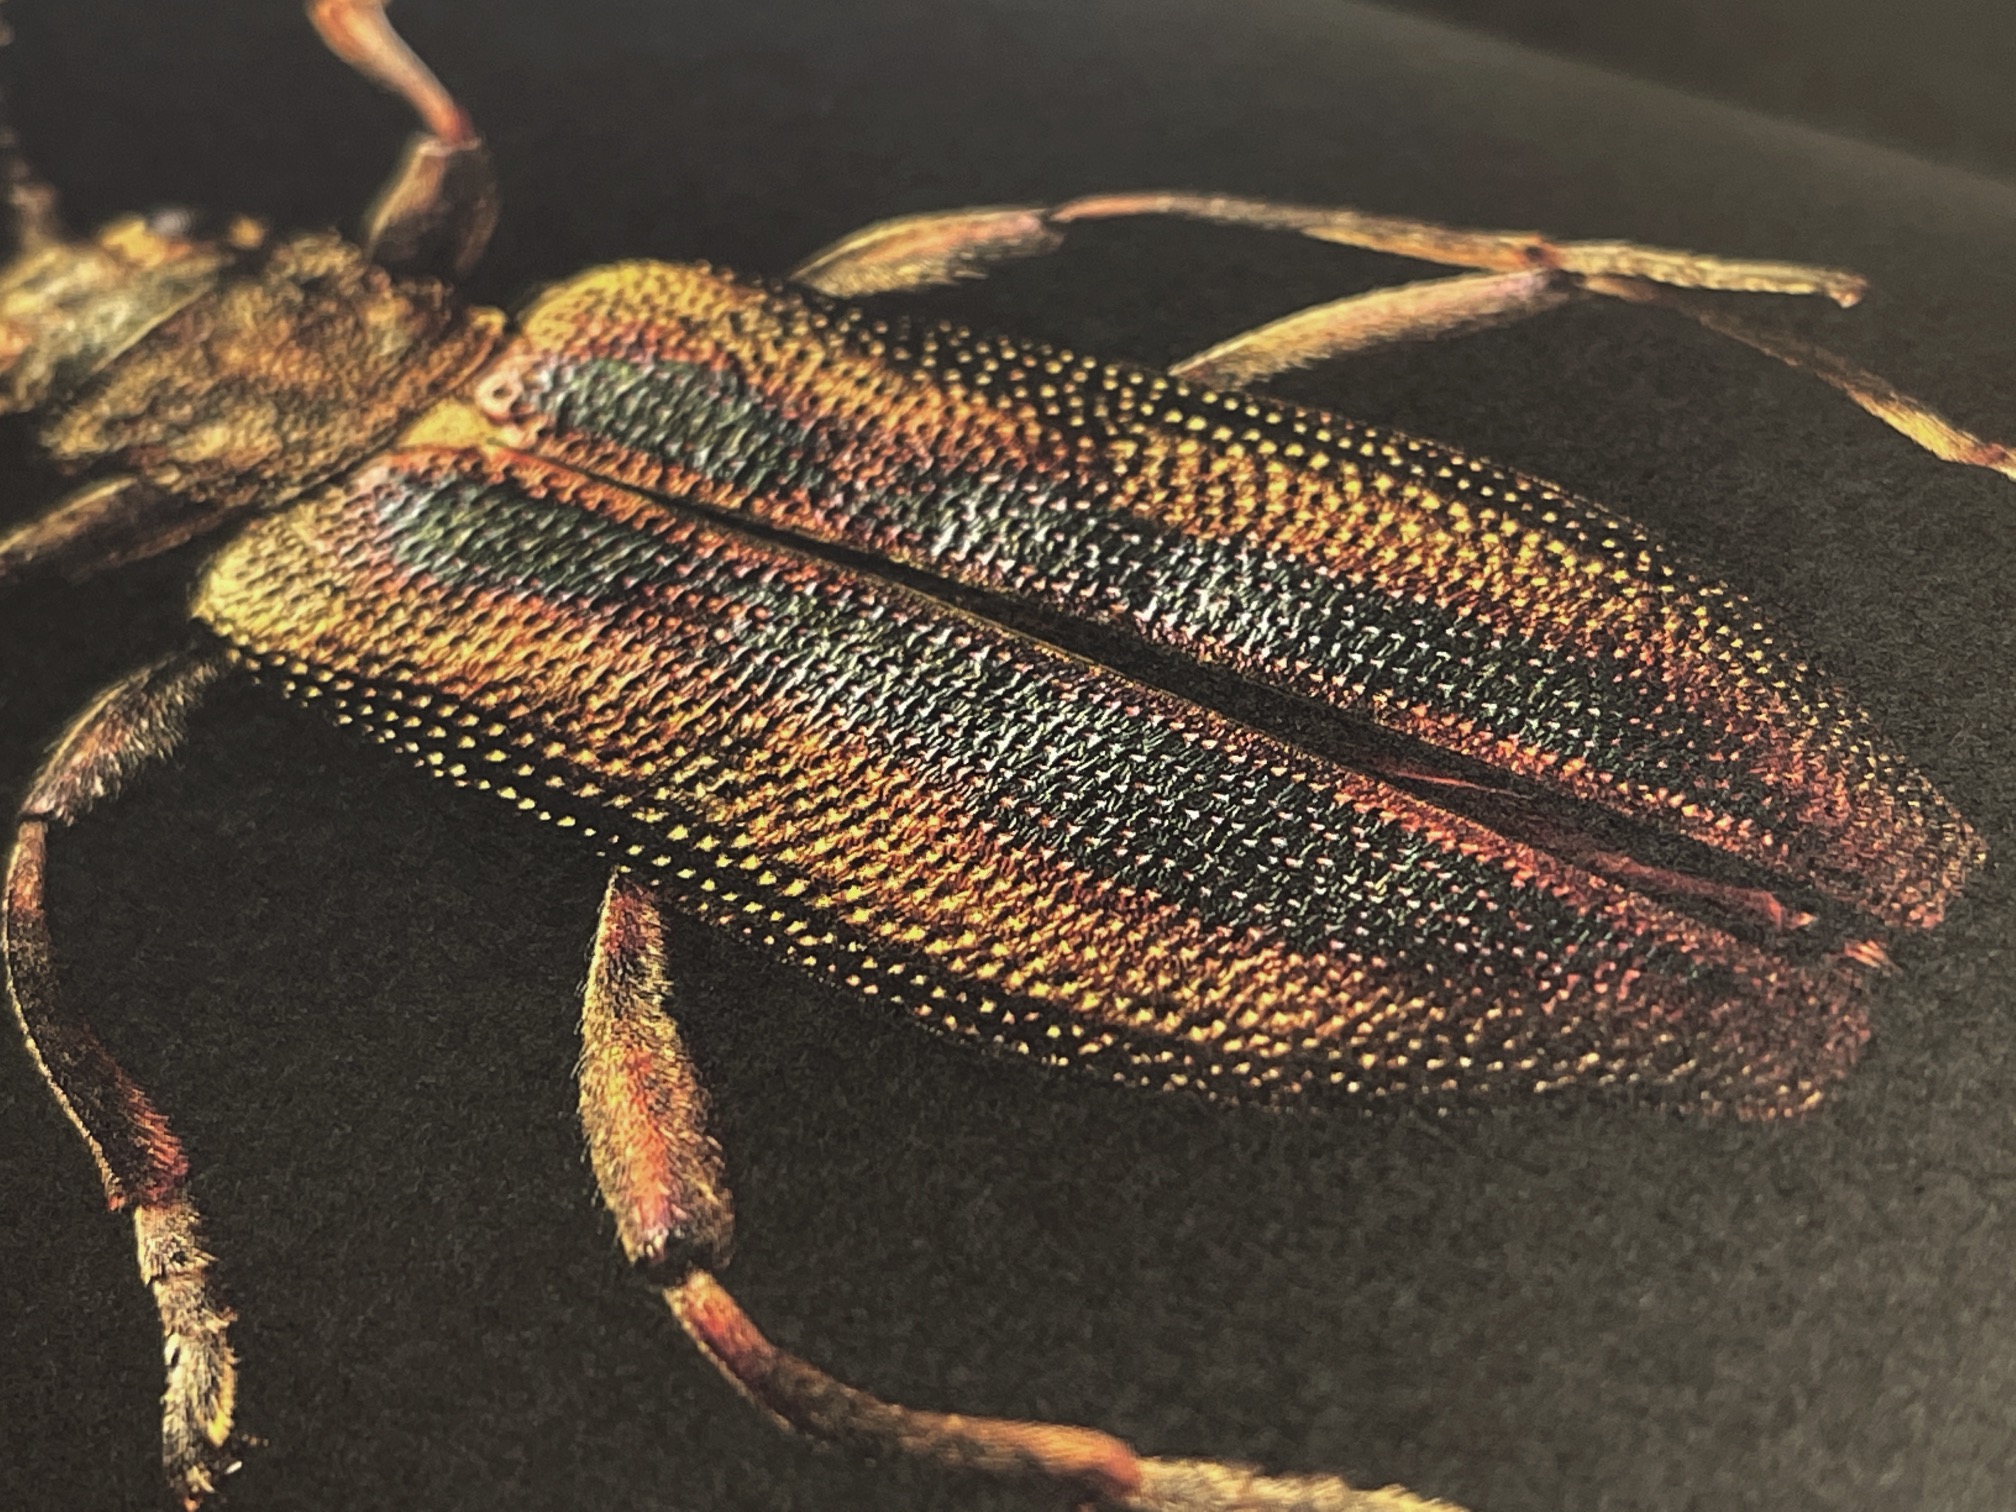 A close-up image of a leaf beetle featured in the Selux Imagebook.